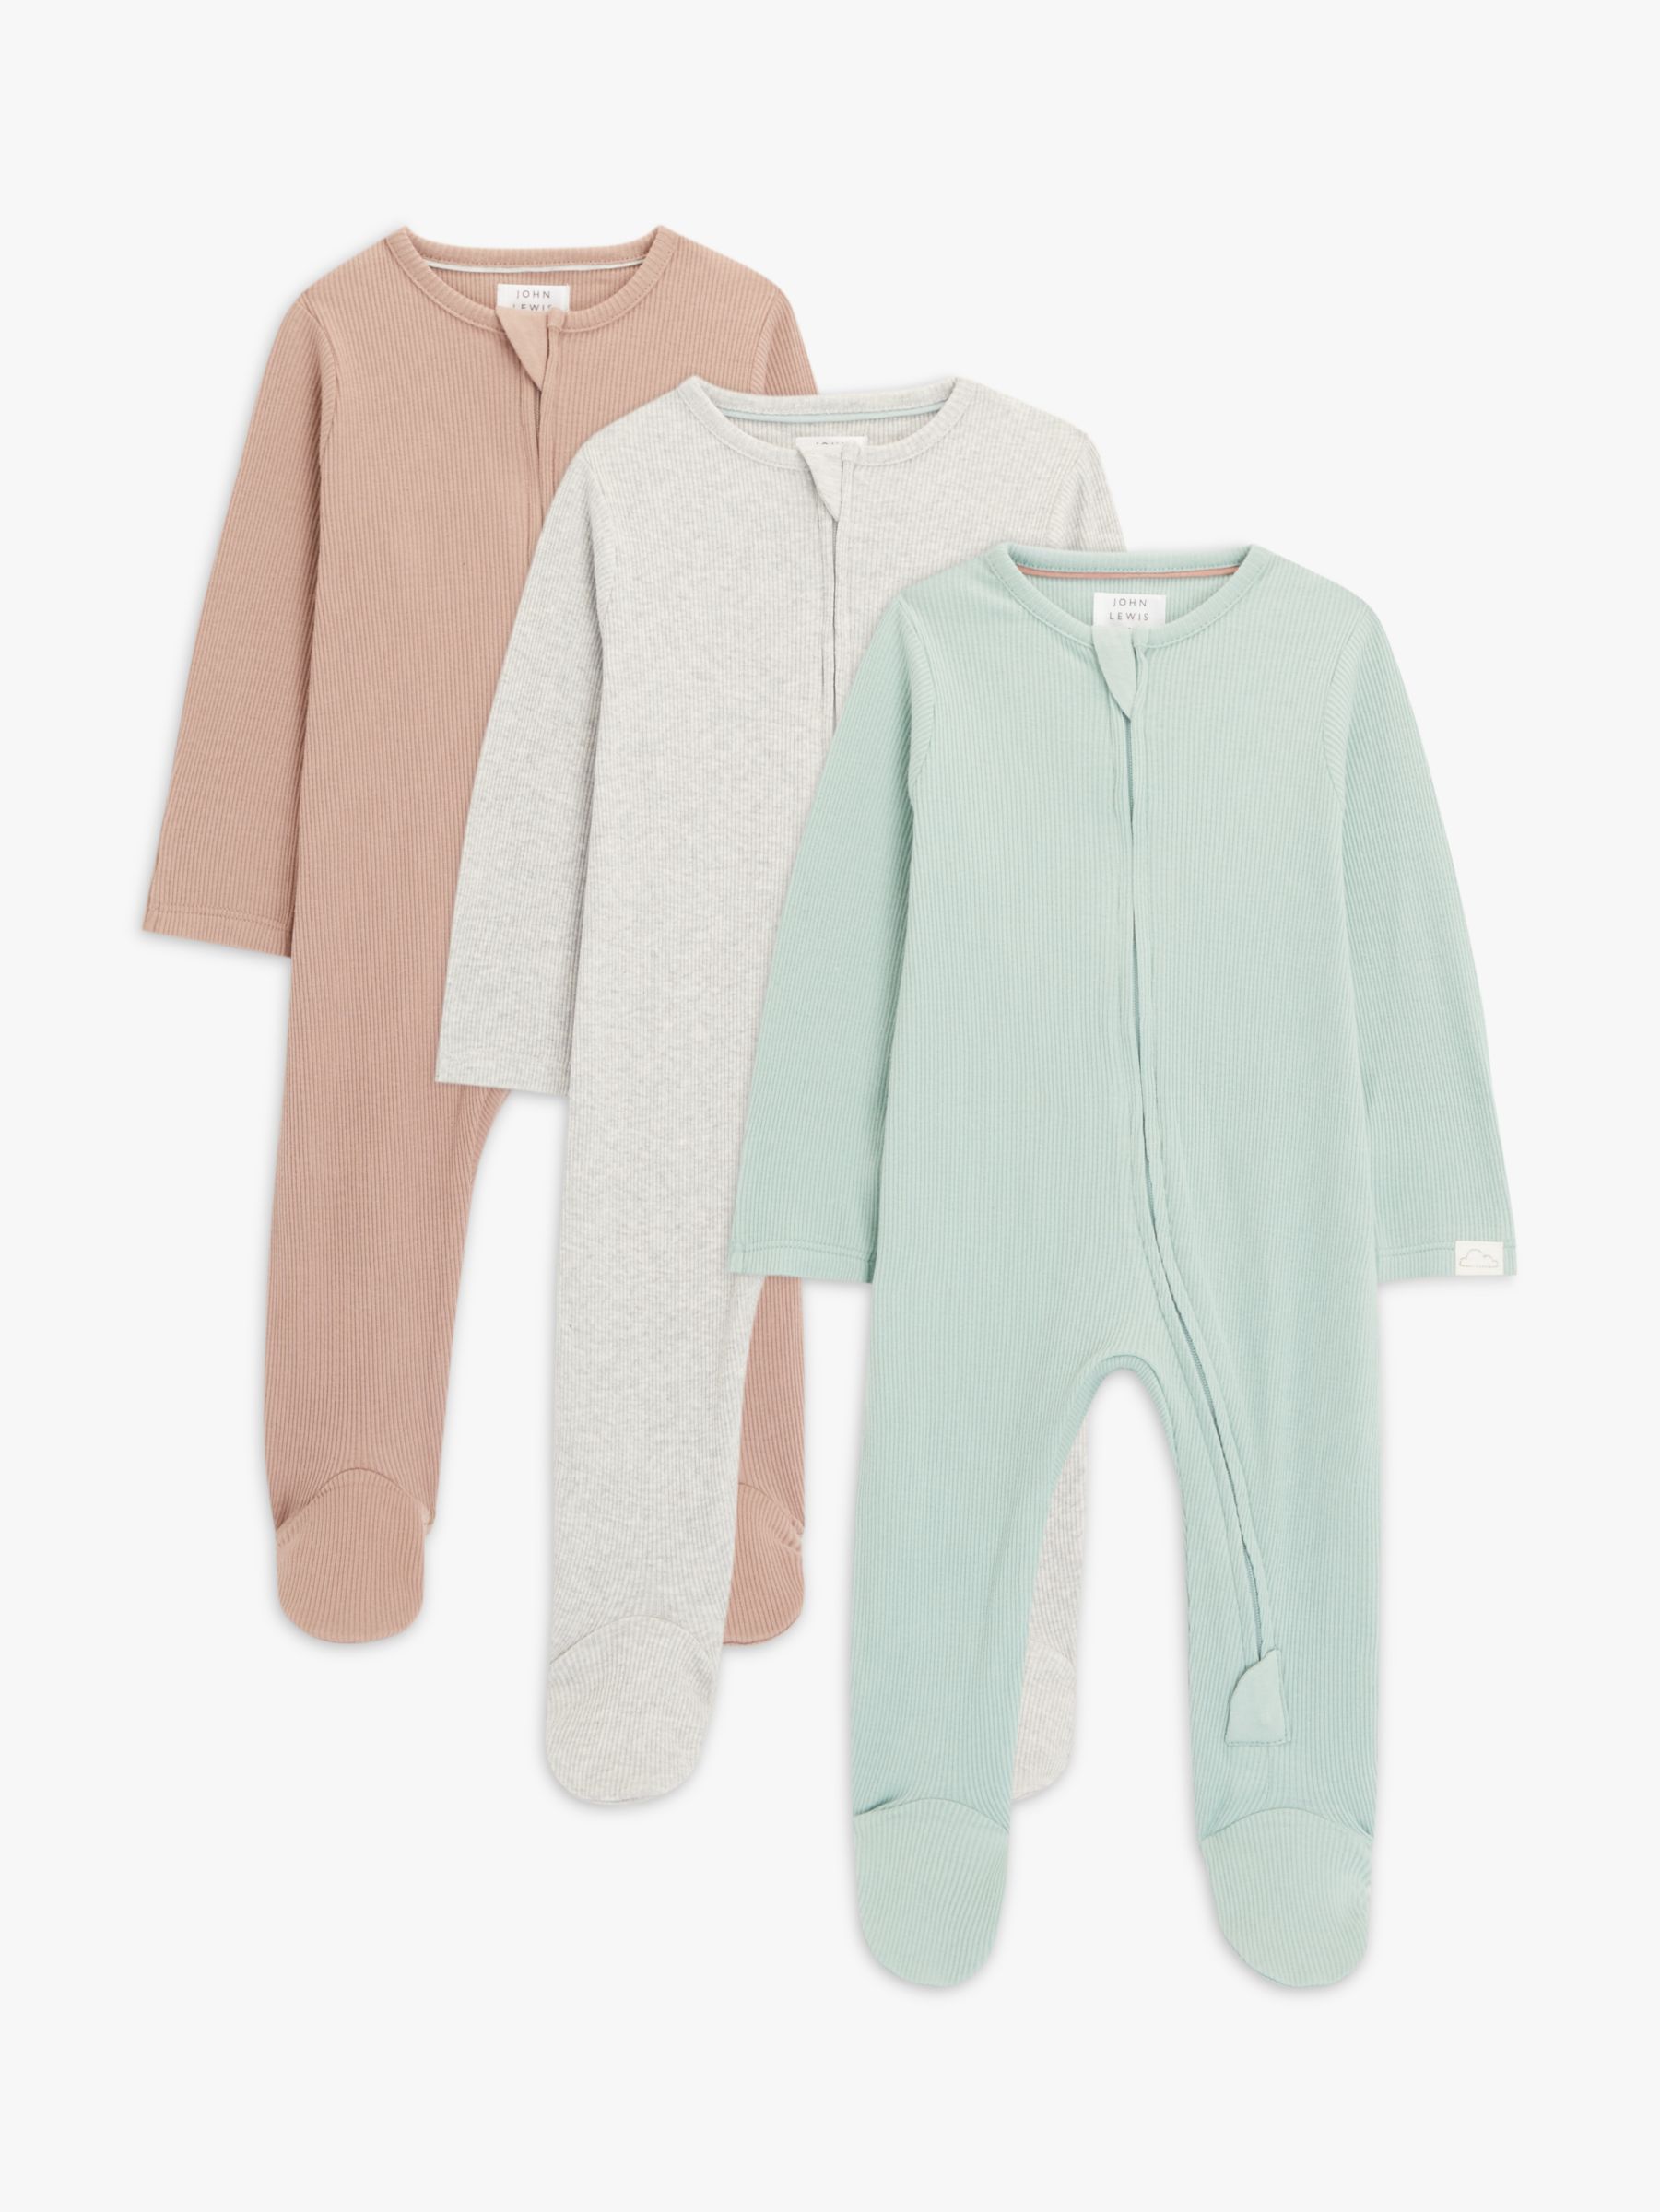 John Lewis Baby GOTS Organic Cotton Ribbed Two-Way Zip Sleepsuit, Pack of 3, Pastels